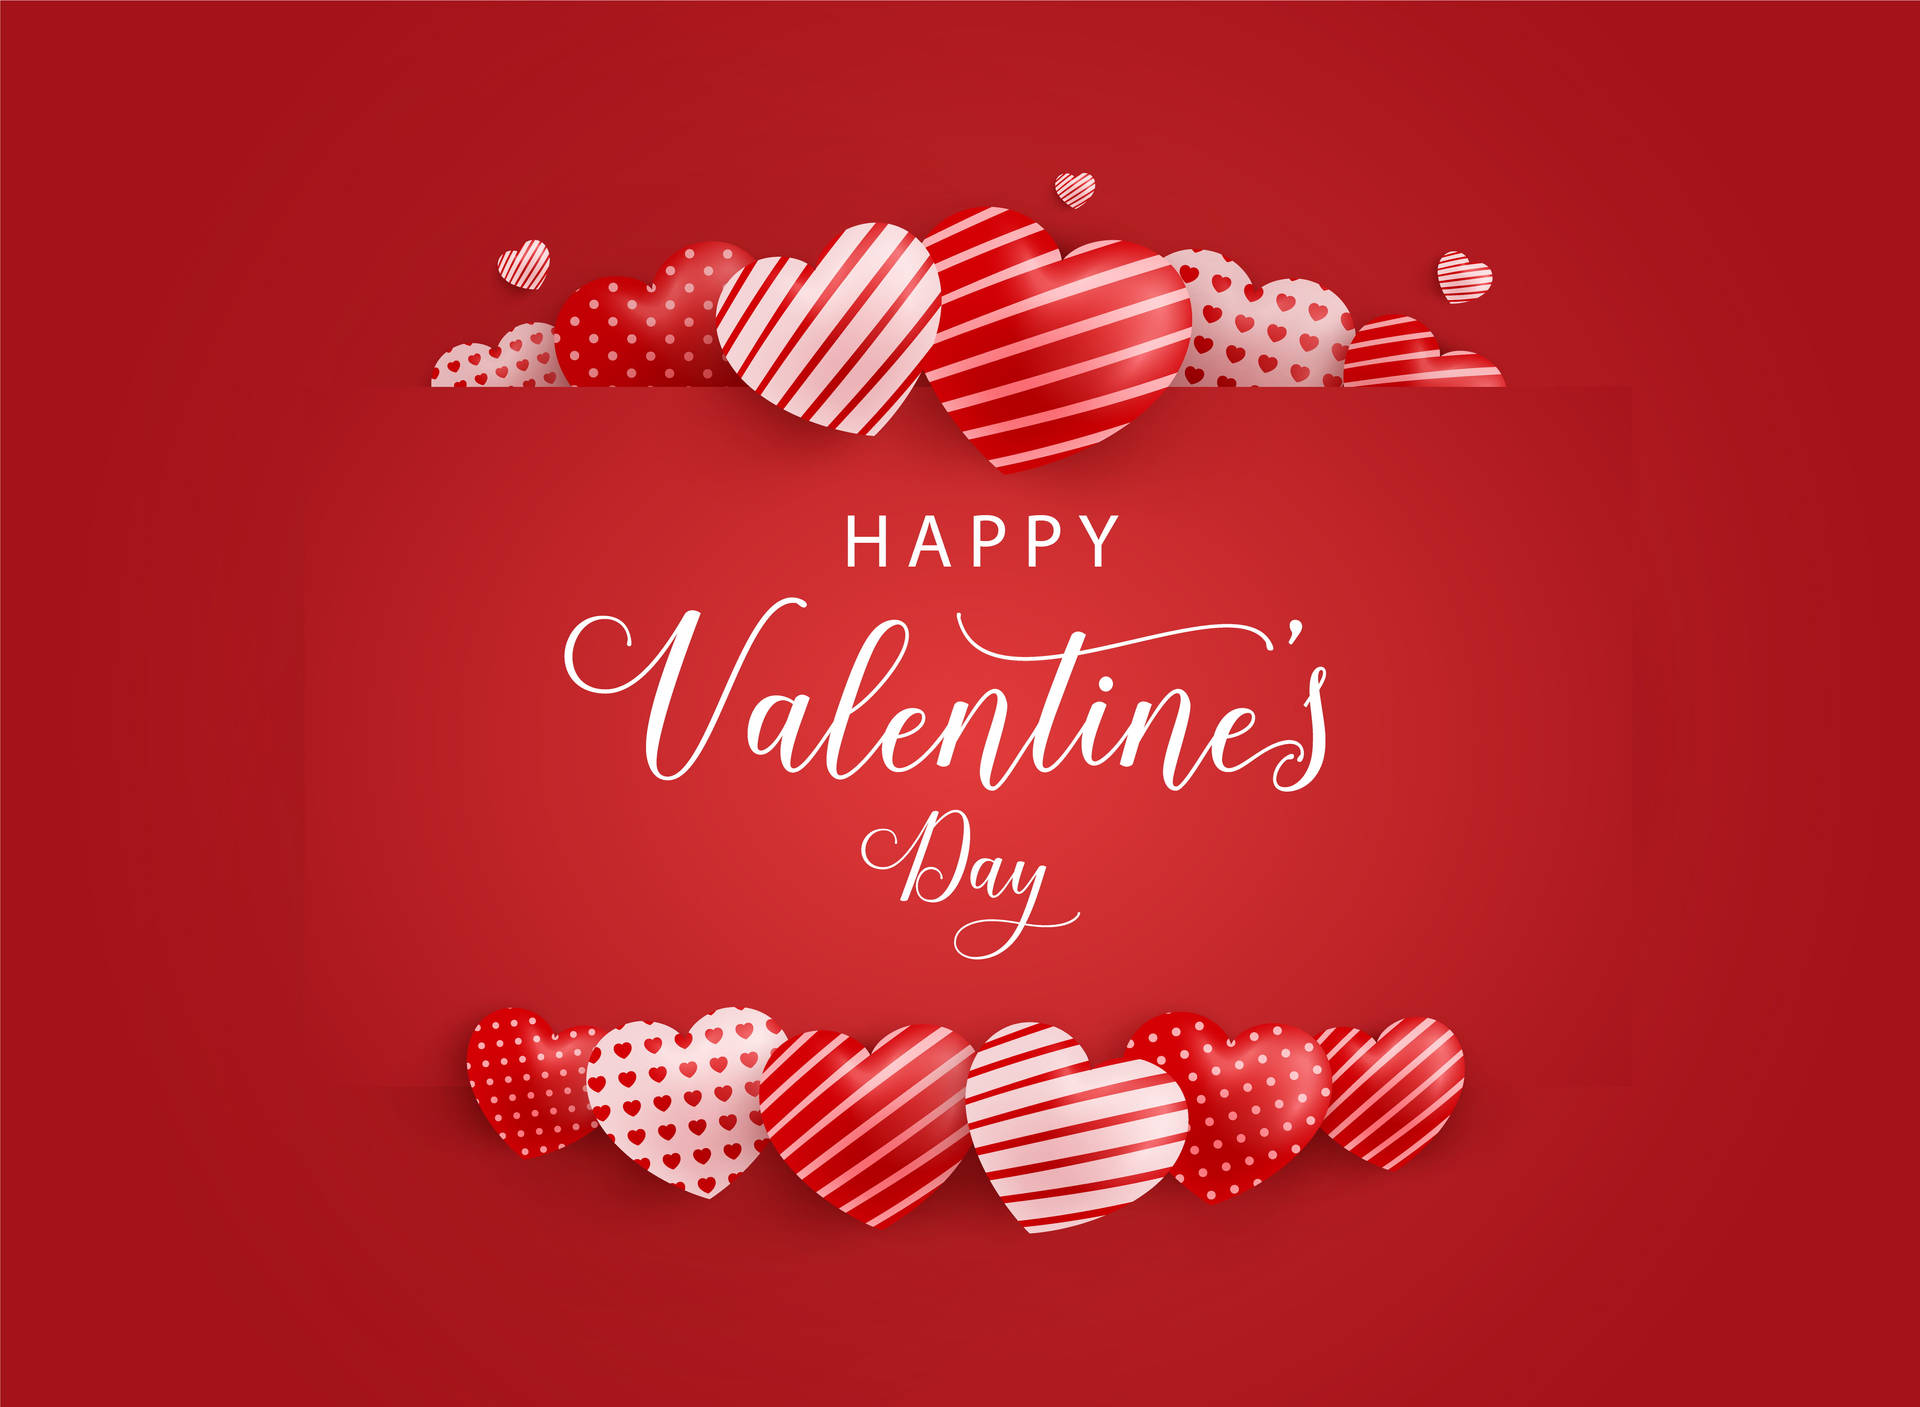 Happy Valentine’s Day Patterned Hearts Wallpaper